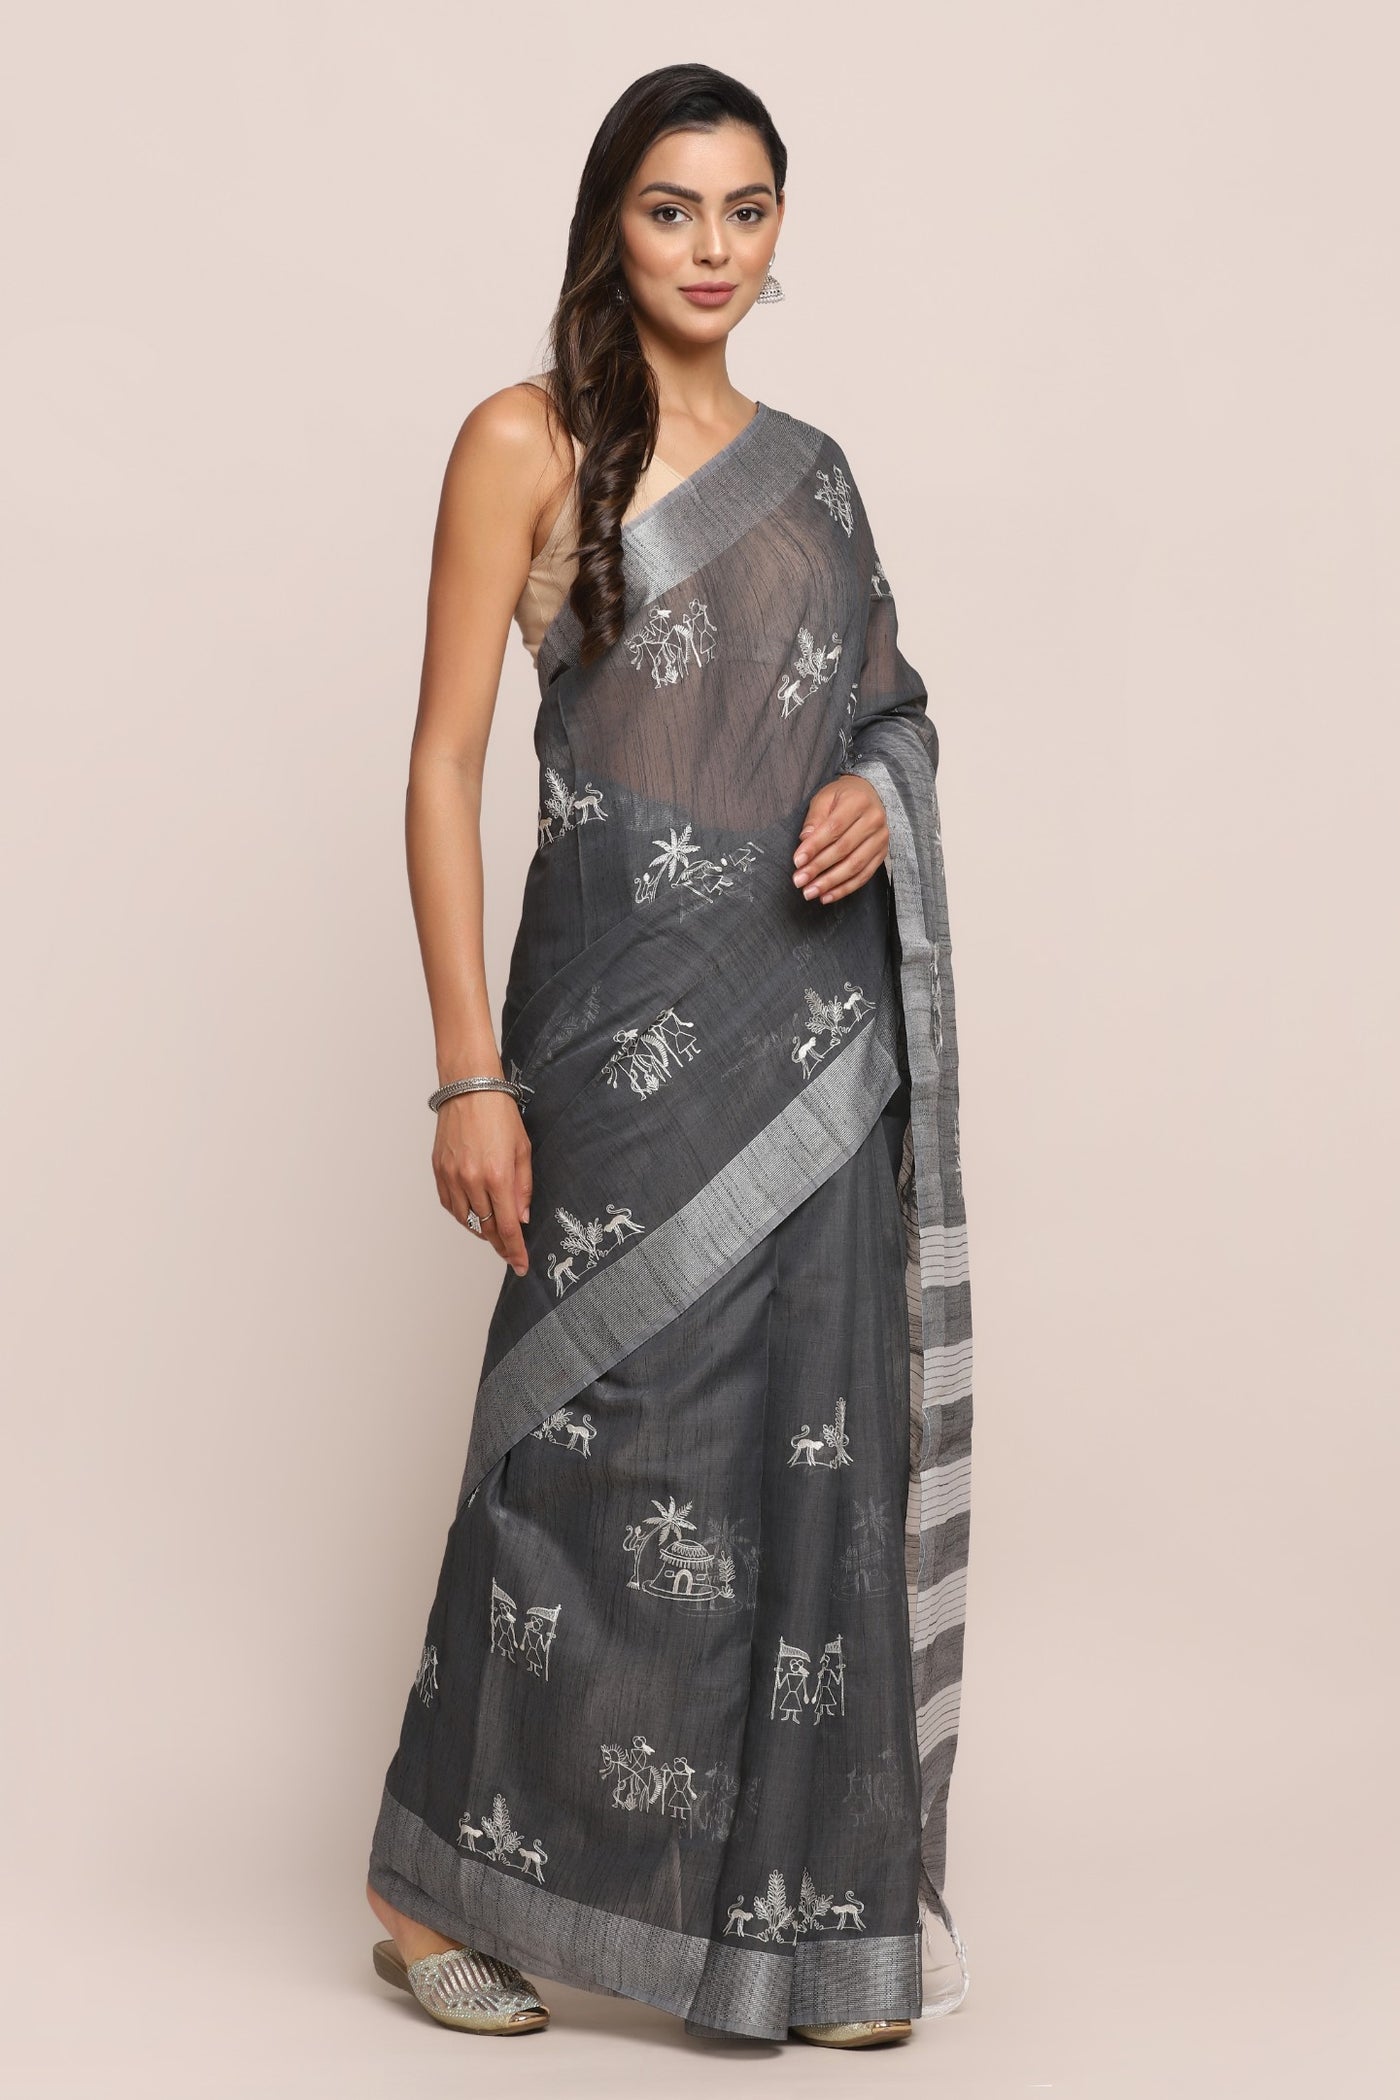 Classy grey color geometrical motif embroidered saree